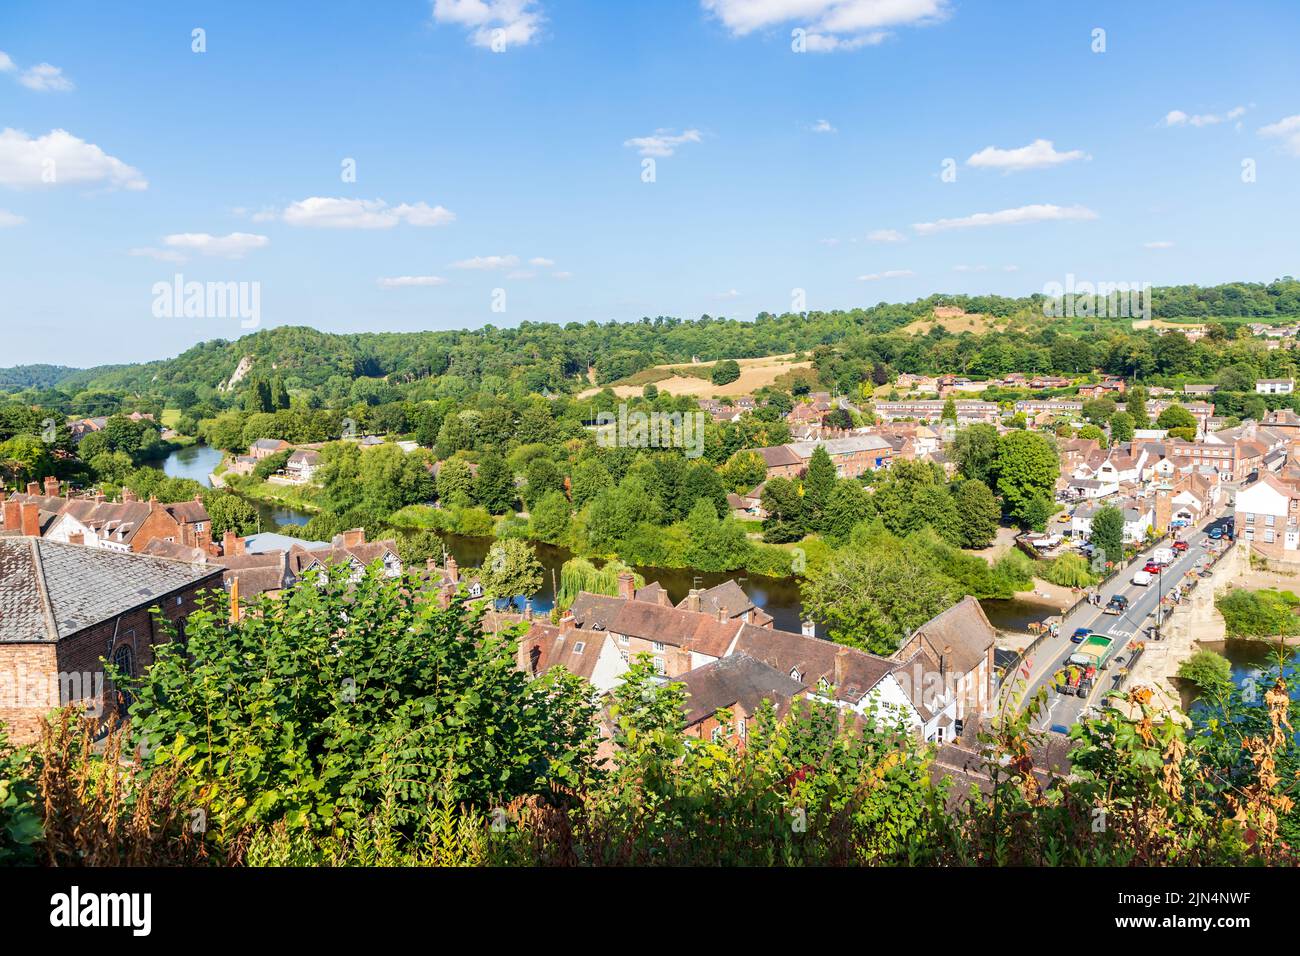 A view from High Town in Bridgnorth in Shropshire, UK looking to Low Town and the River Severn below Stock Photo